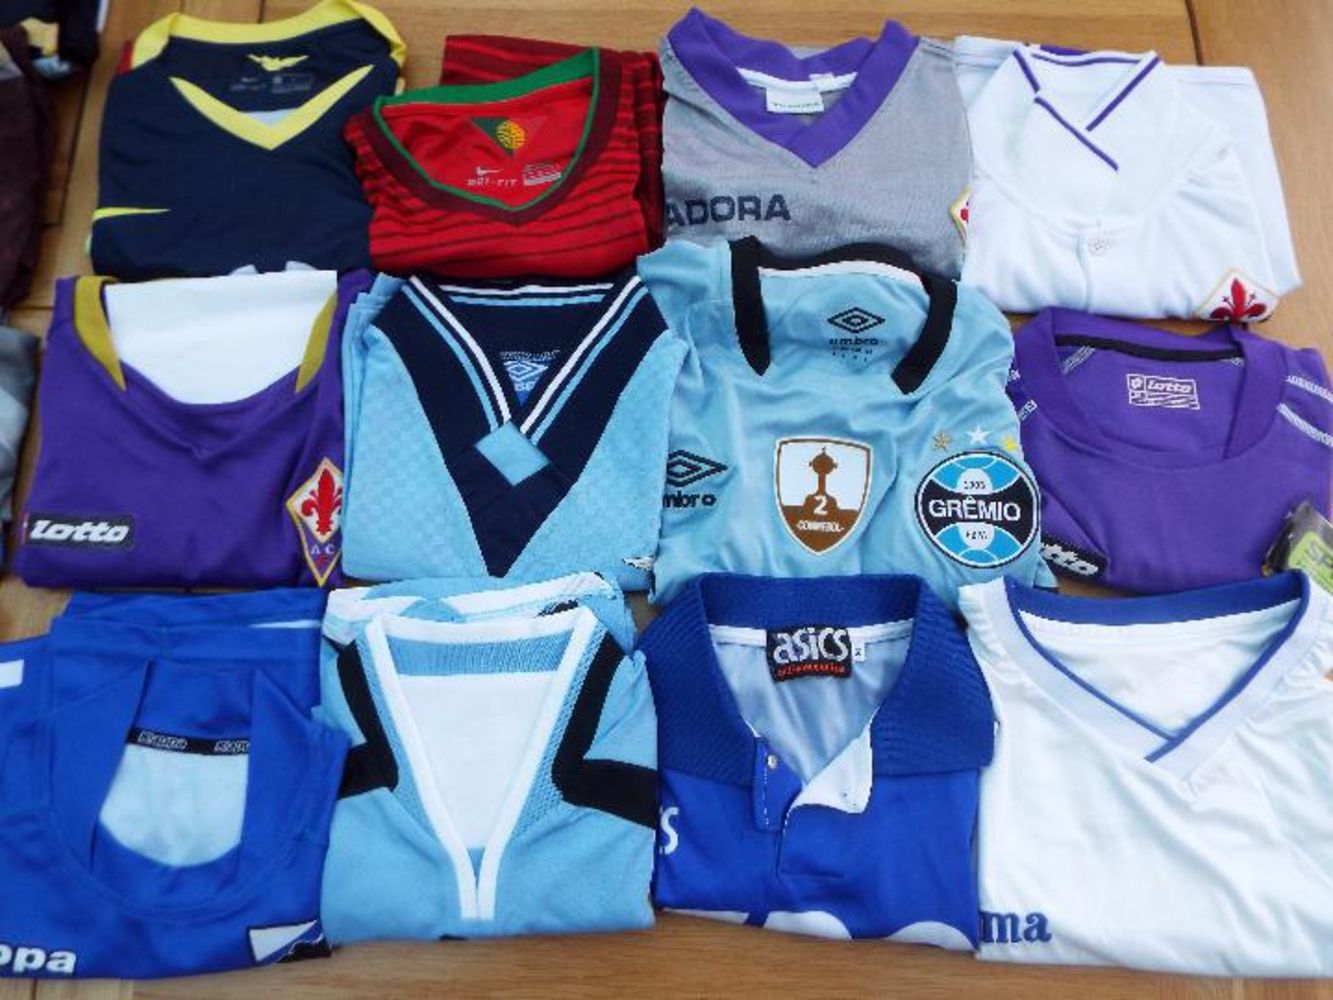 Surplus Retail Stock of Sportswear, Leatherware, also Pre-Owned Household Goods, etc